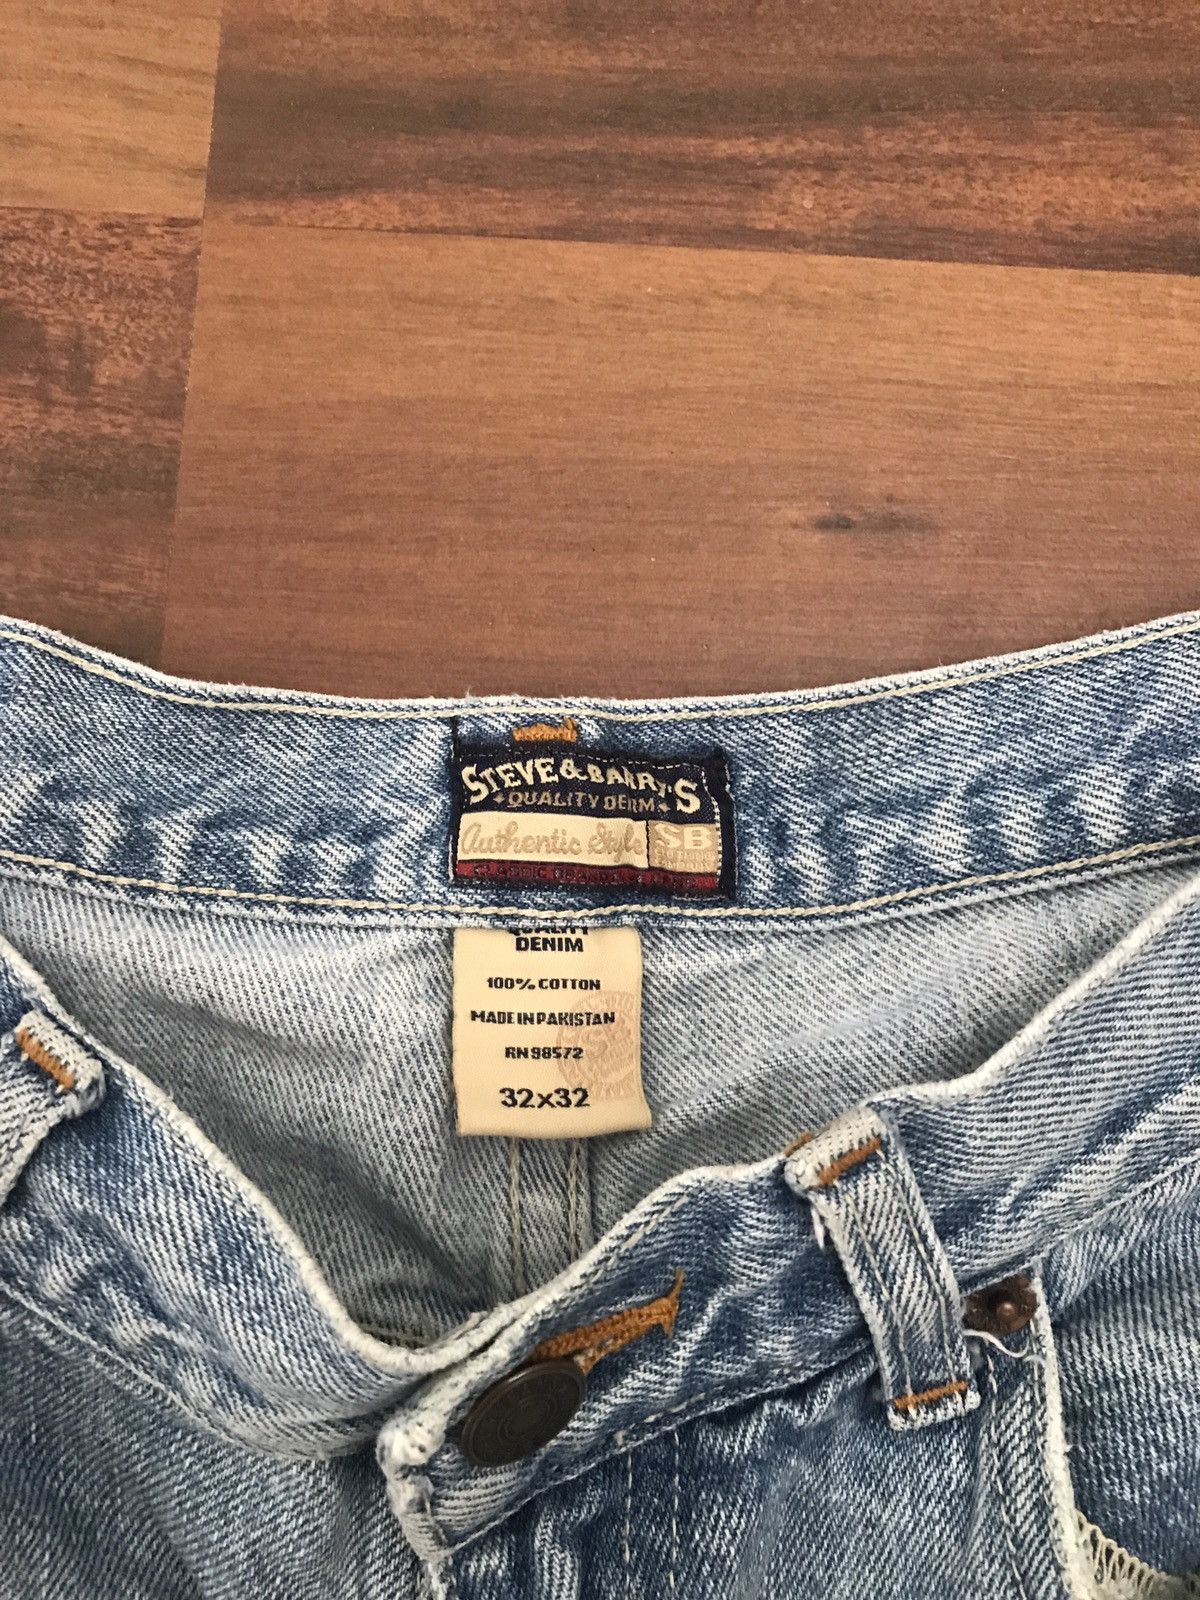 Steve And Barrys Steve and Barry’s denim Size US 32 / EU 48 - 2 Preview